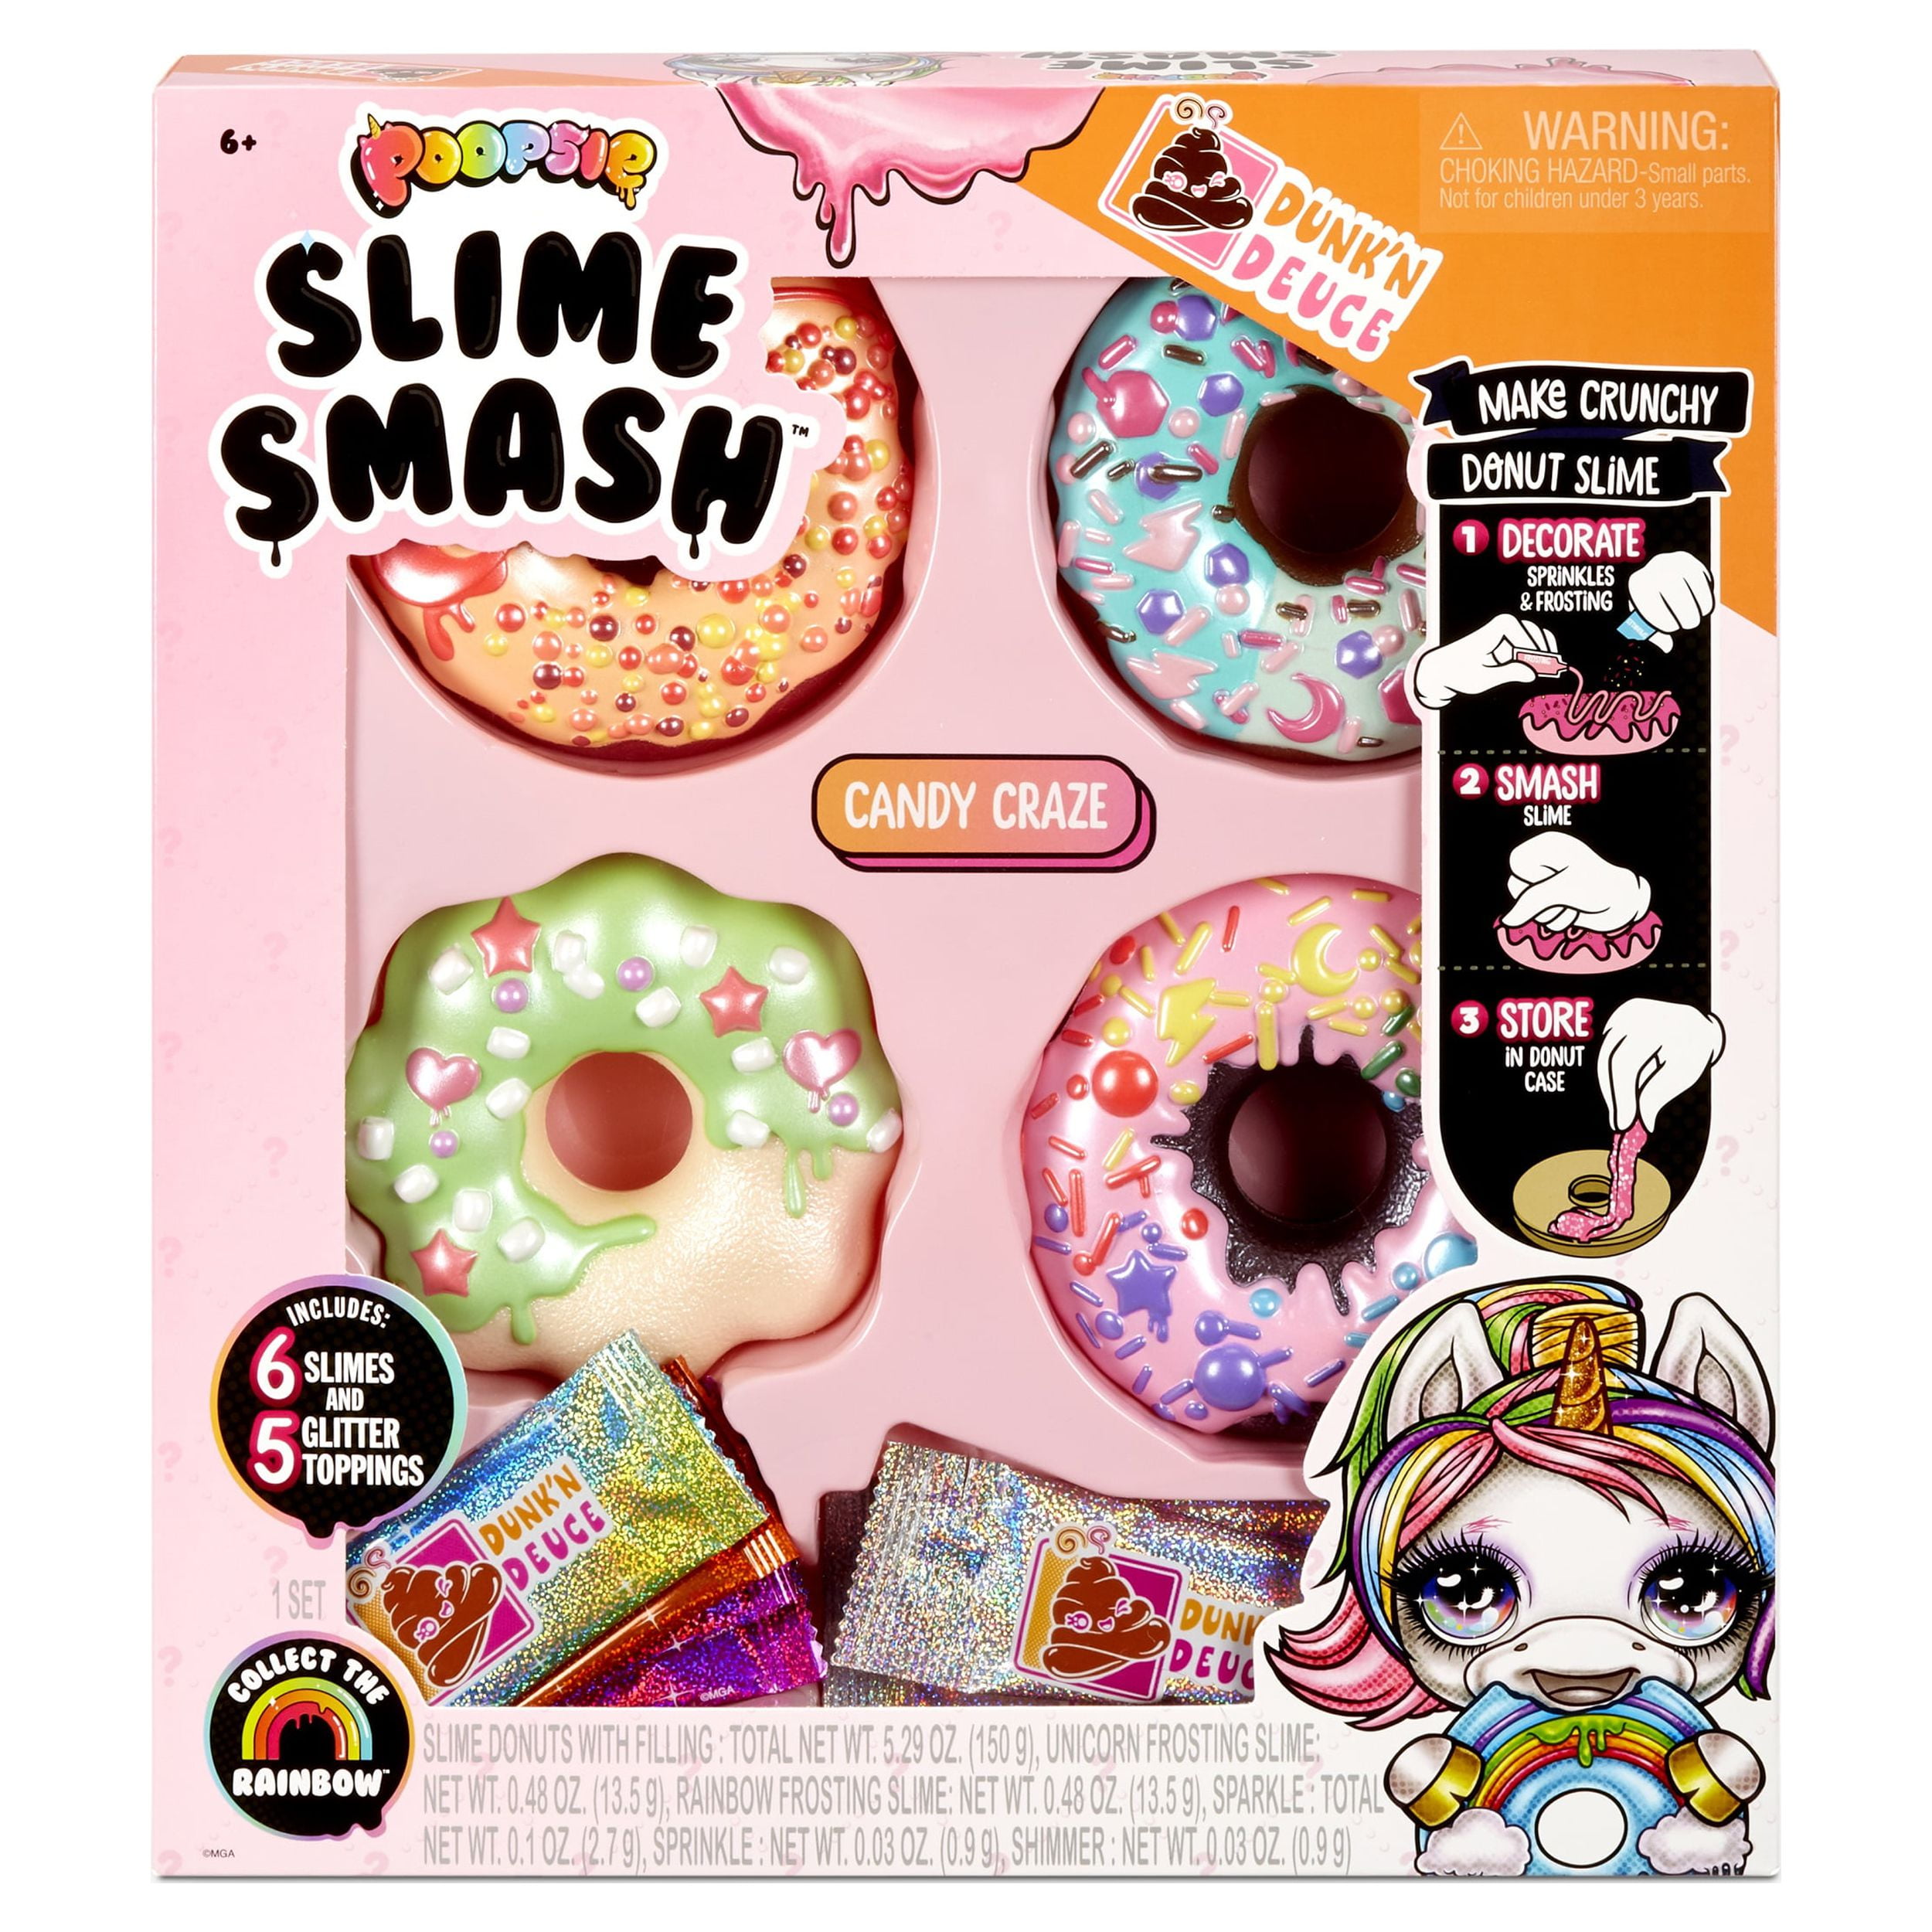 Poopsie Slime Surprise! Smash Candy Craze Play Food Toy with Crunchy  Glitter Slime & 4 Donut Shaped Storage Cases (6 oz of Slime) for Children  Ages 4 5 6+ 